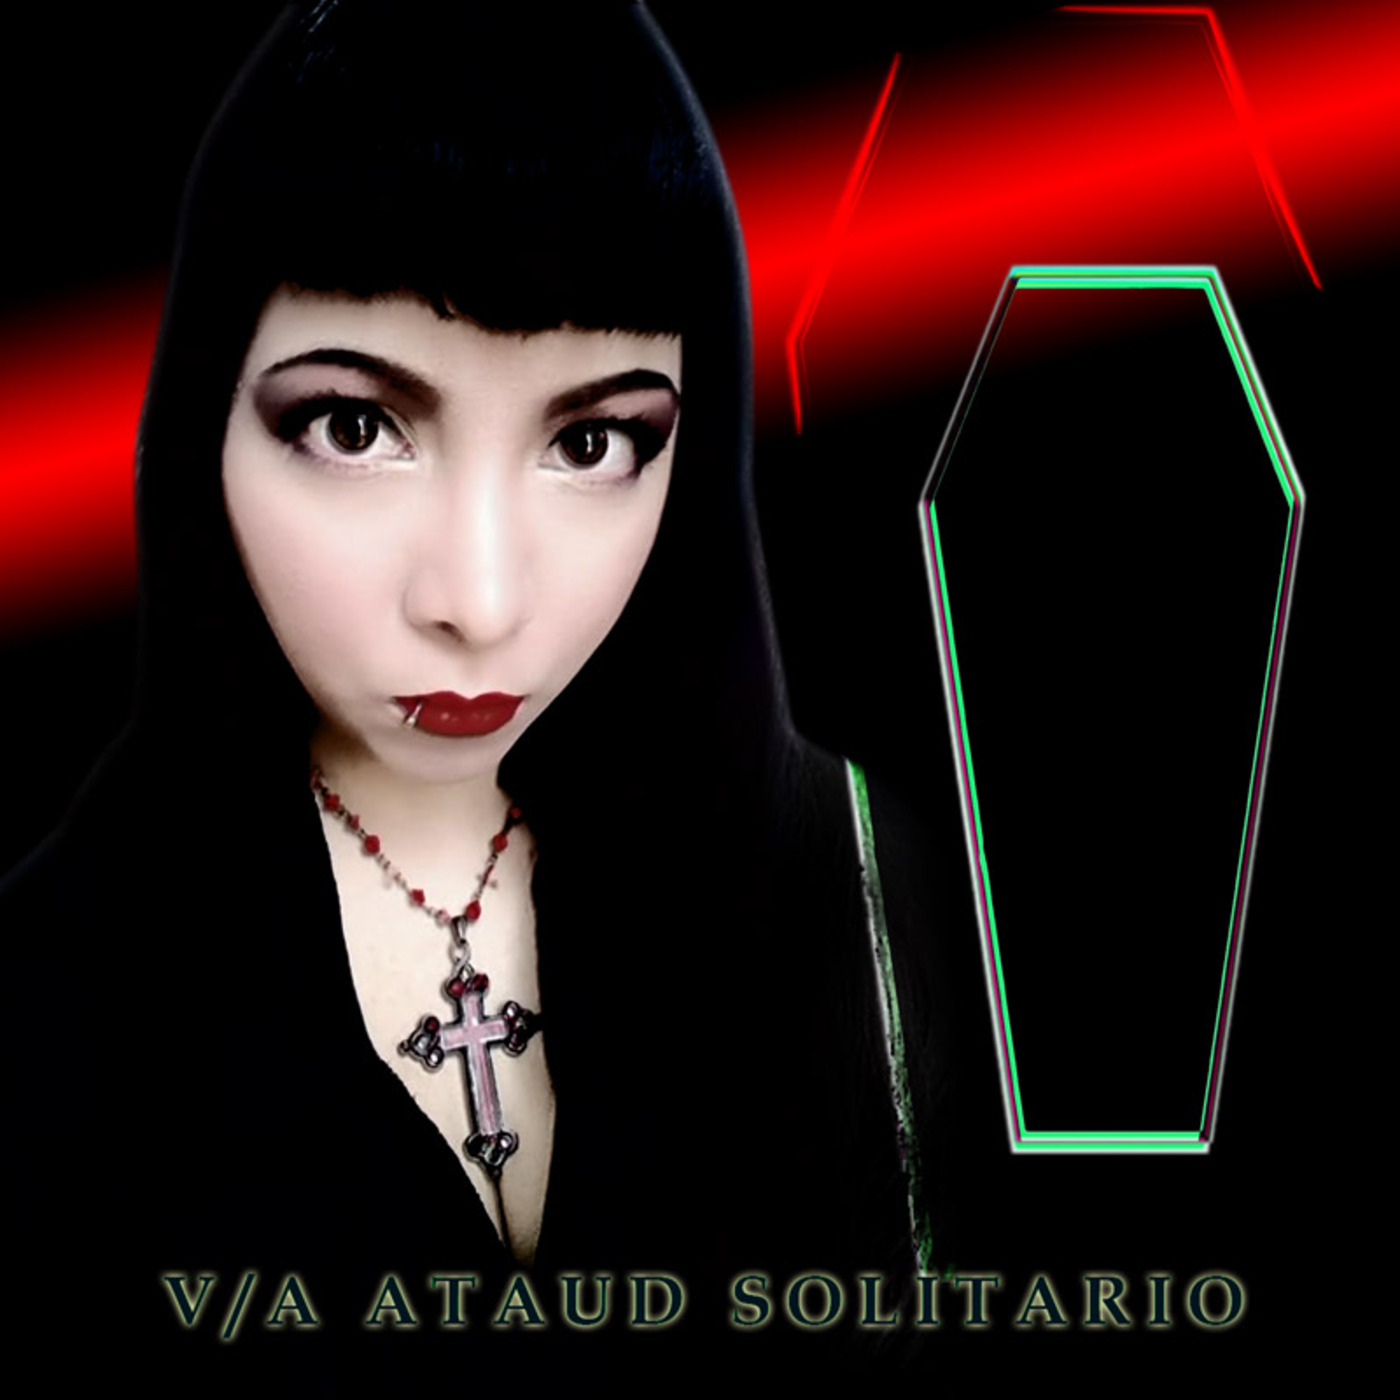 07 - My Own Cubic Stone - Ataud Solitario (feat Humanfobia)